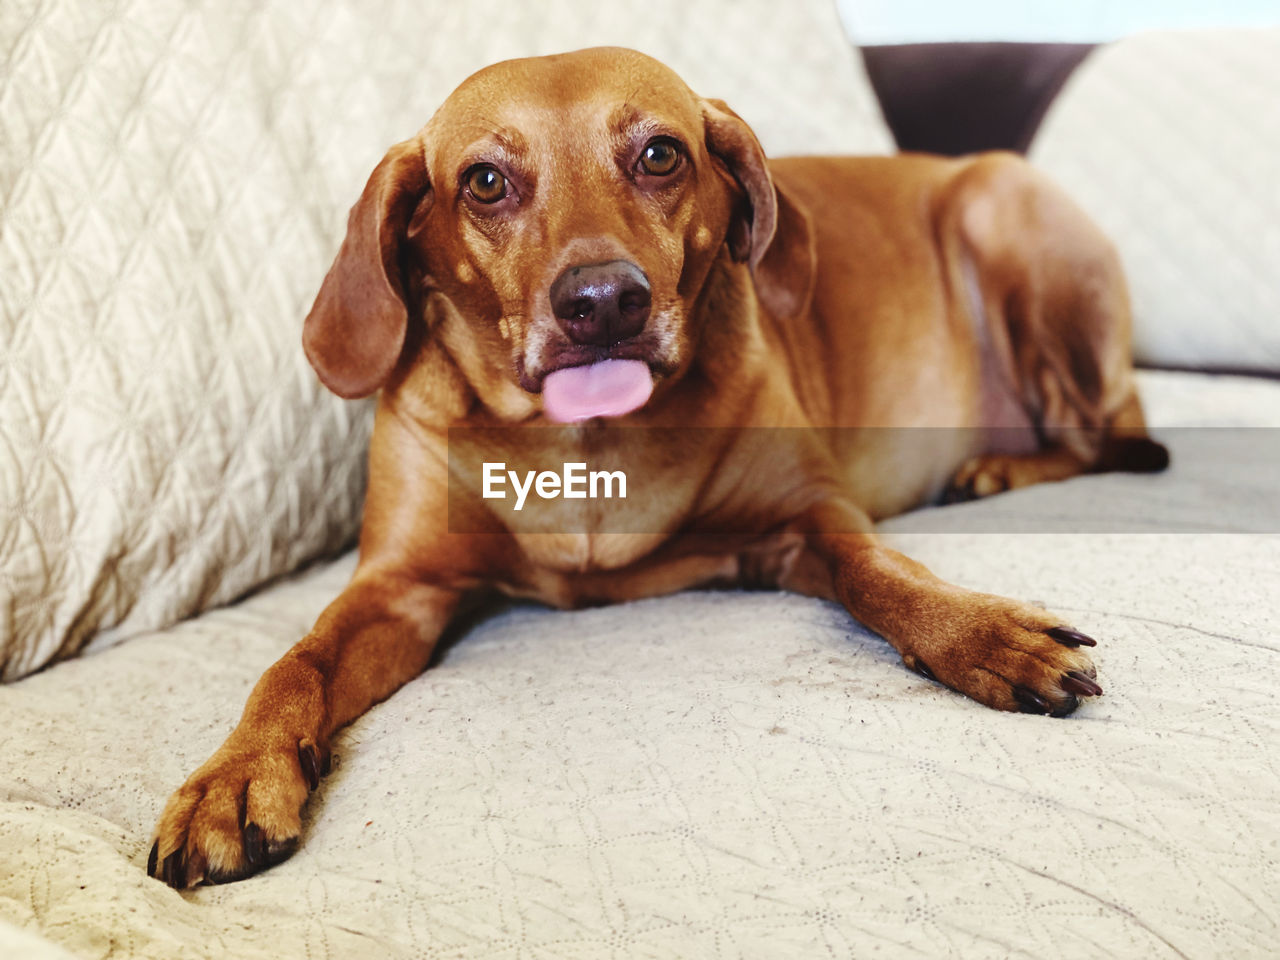 dog, canine, one animal, pet, domestic animals, mammal, animal themes, animal, relaxation, portrait, looking at camera, lying down, furniture, brown, no people, sofa, home interior, indoors, puppy, dachshund, resting, carnivore, facial expression, domestic room, cute, focus on foreground, hound, looking